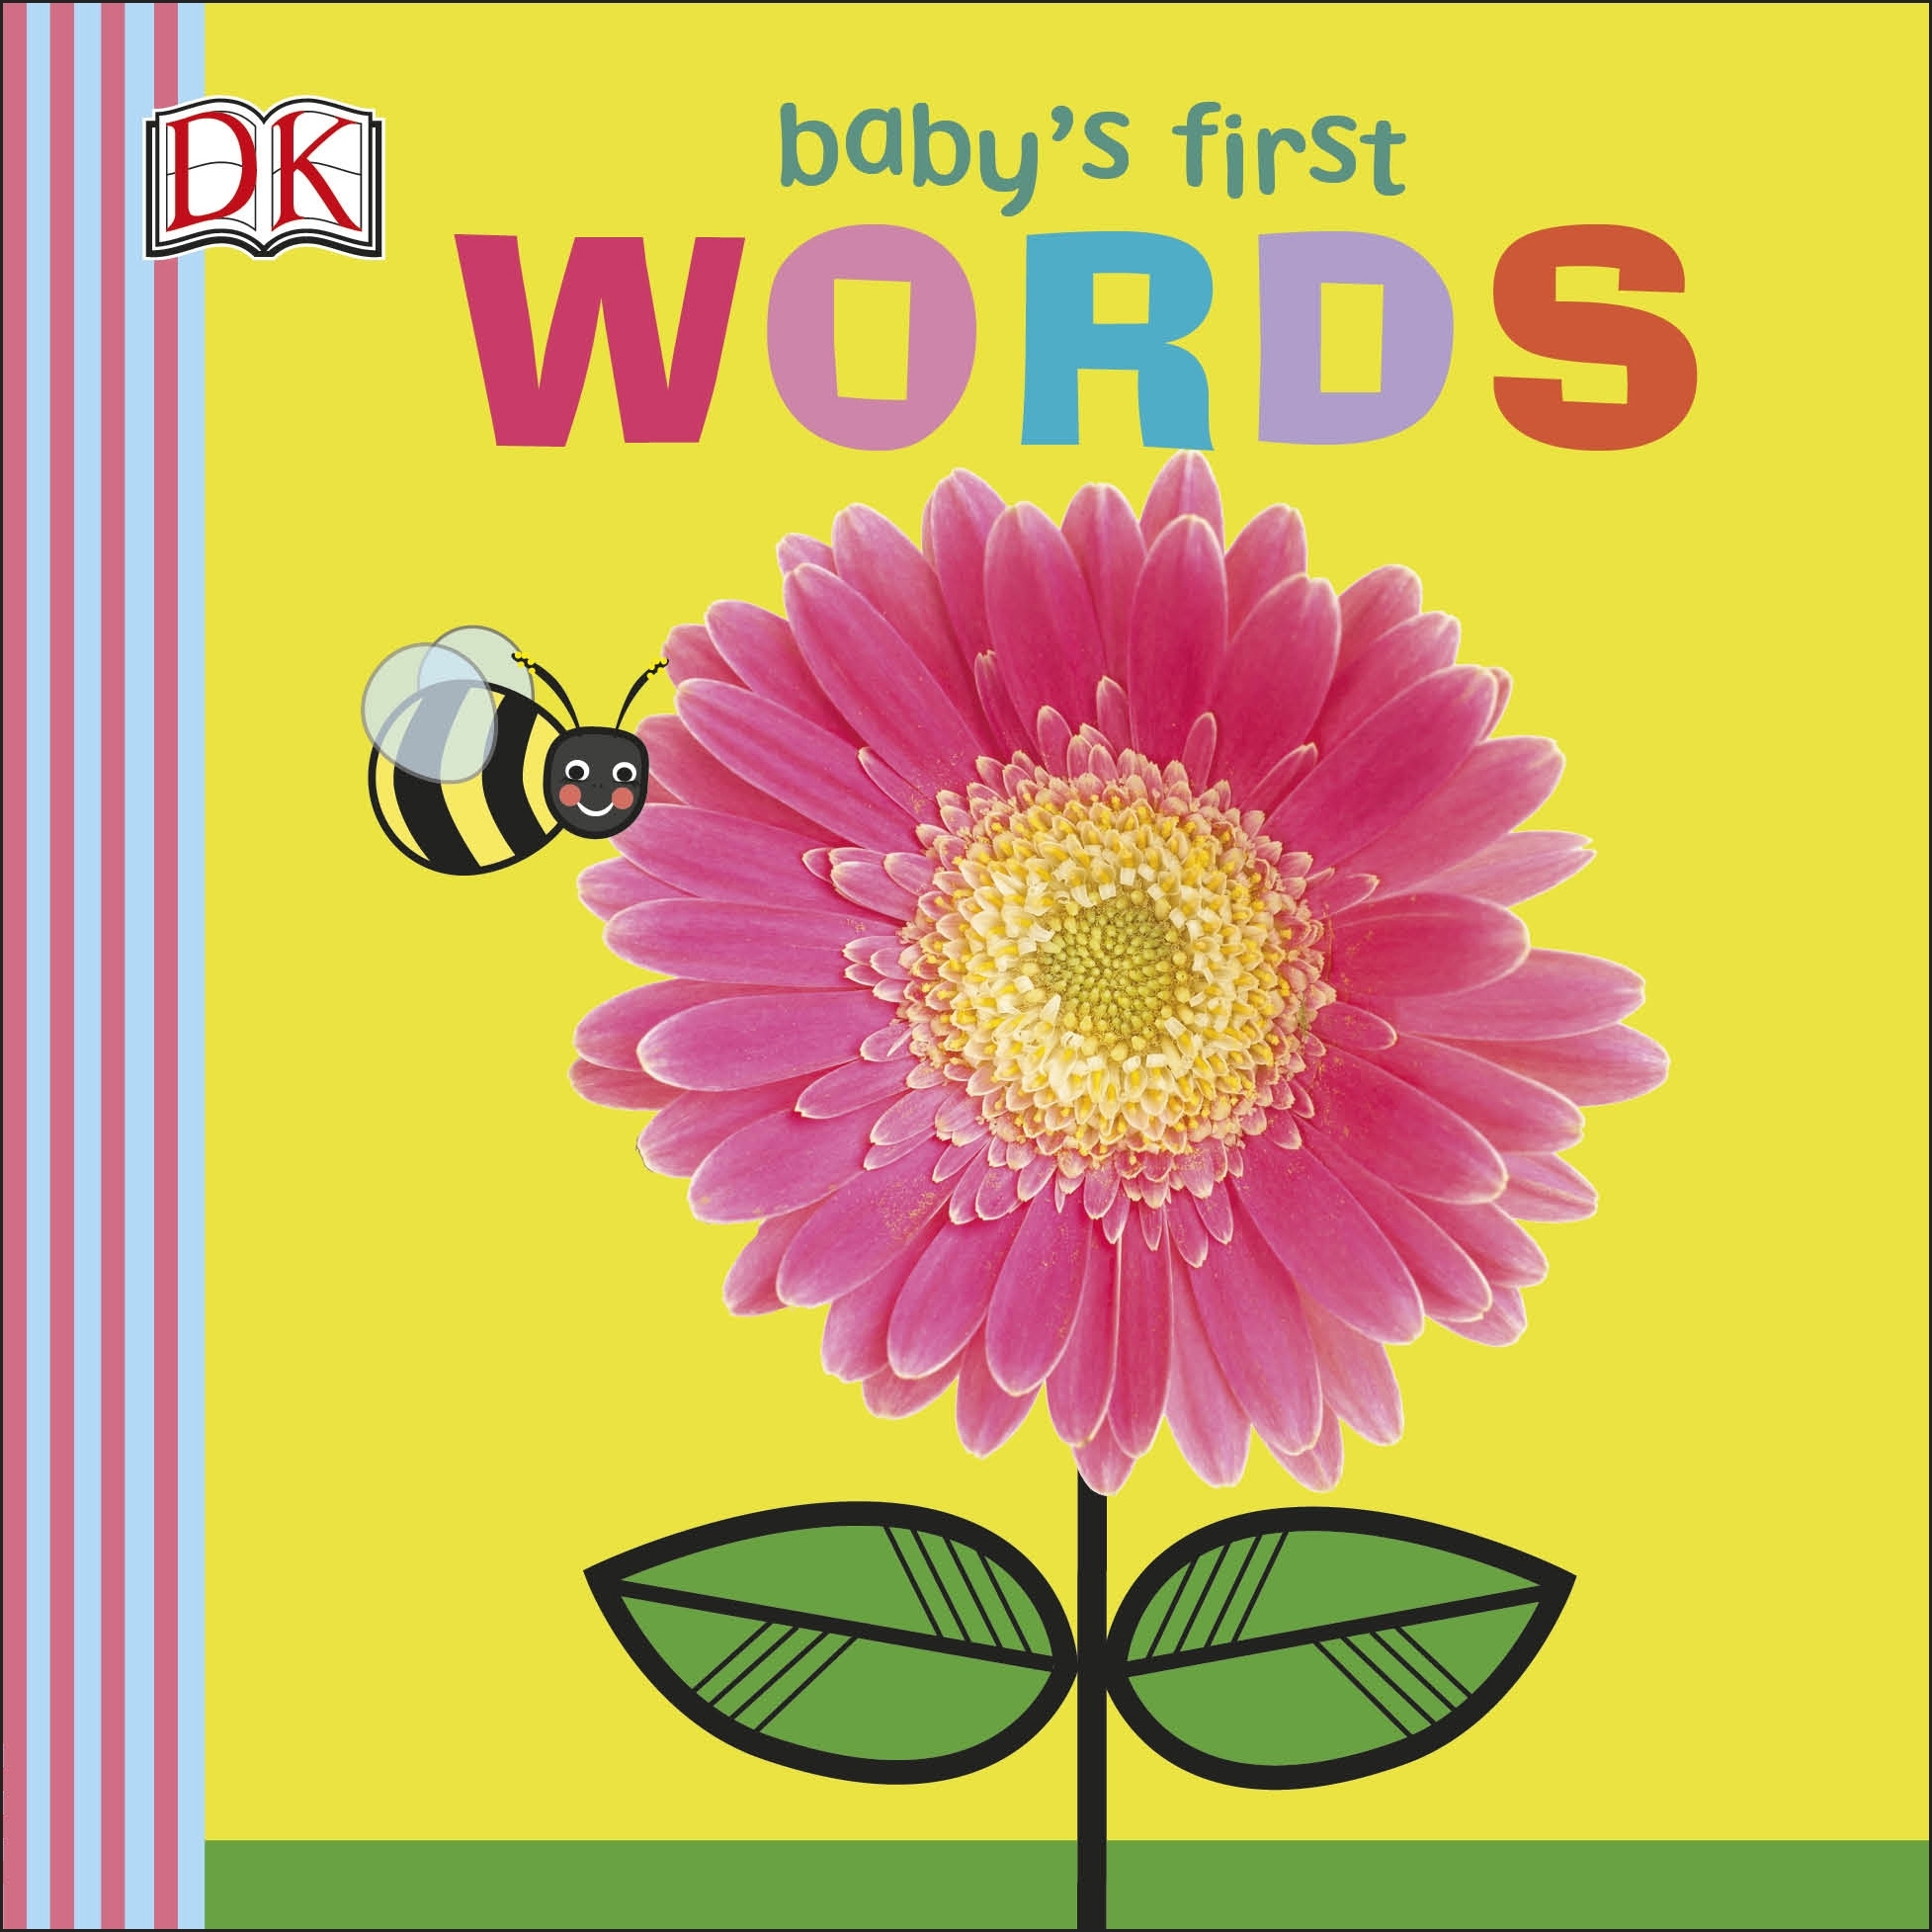 Baby's First Words by DK - Penguin Books New Zealand